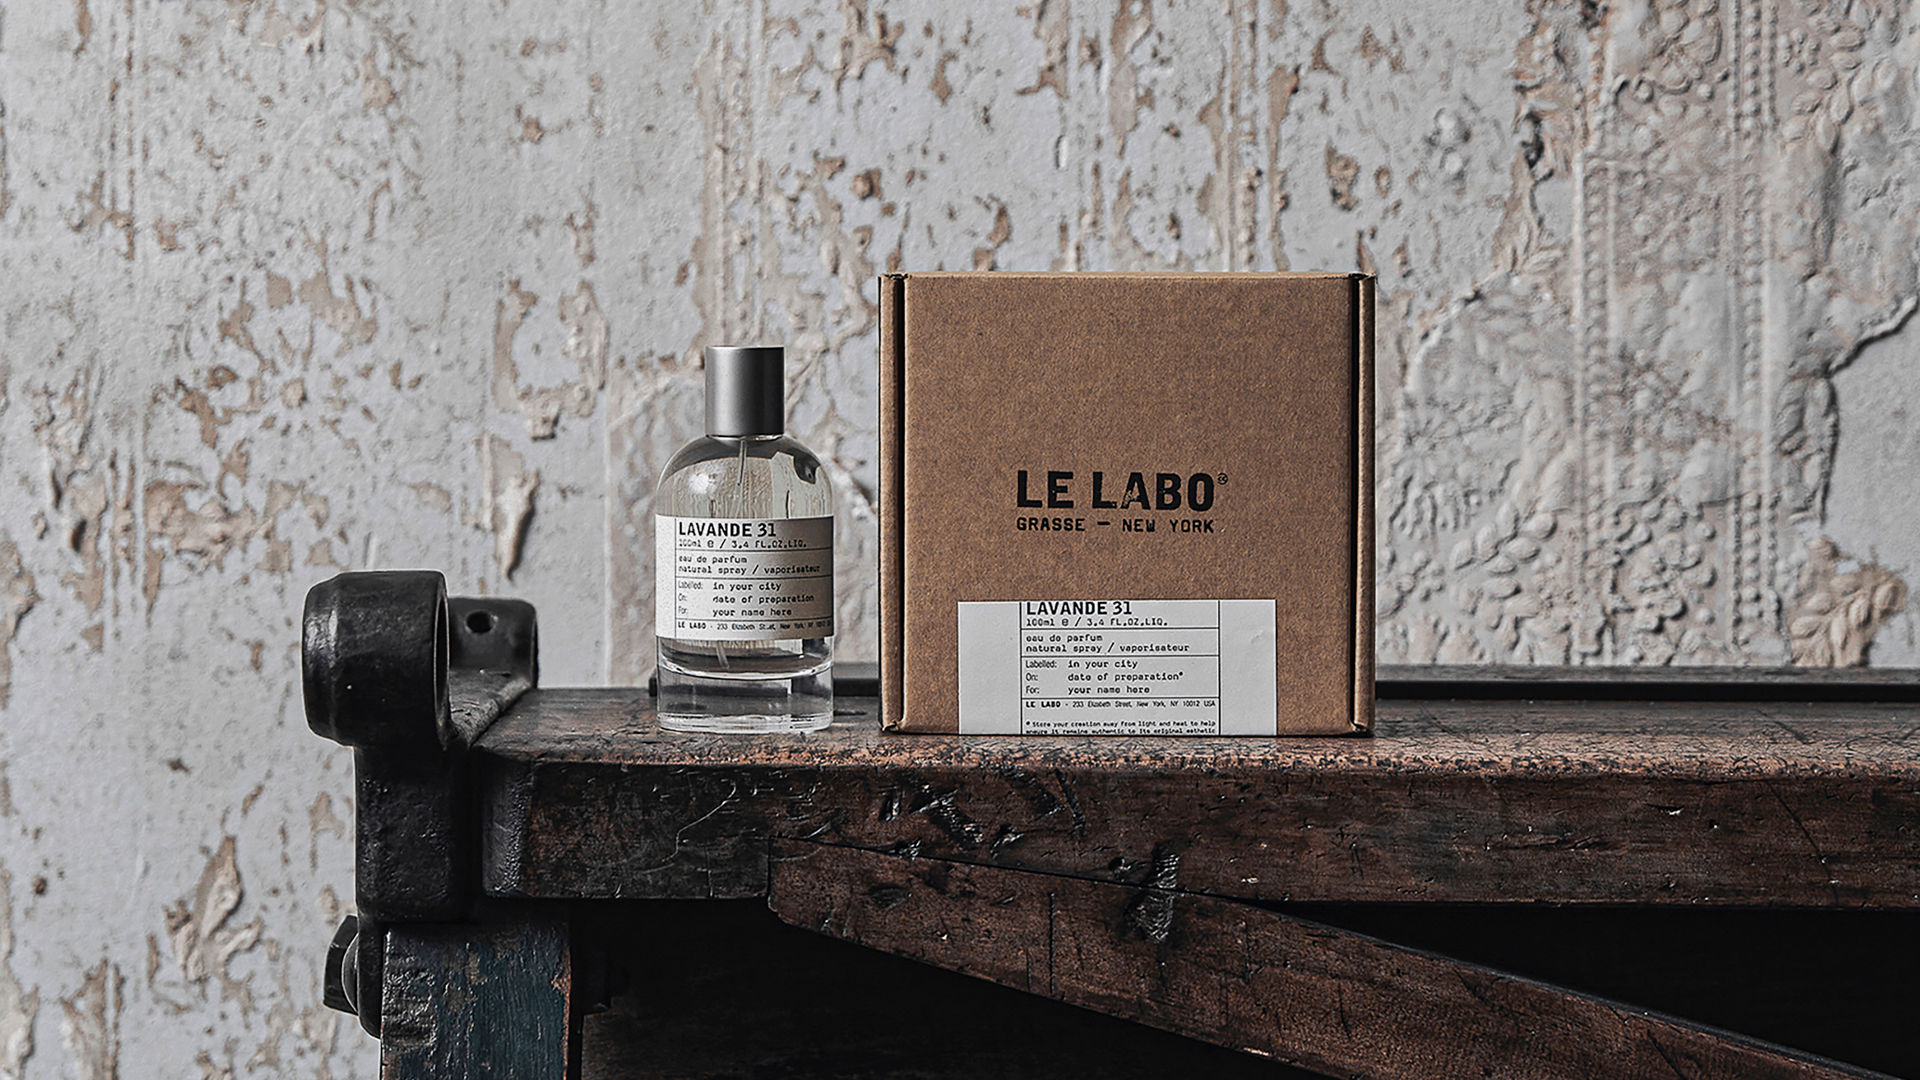 Le Labo gives lavender a surprisingly edgy twist with the new